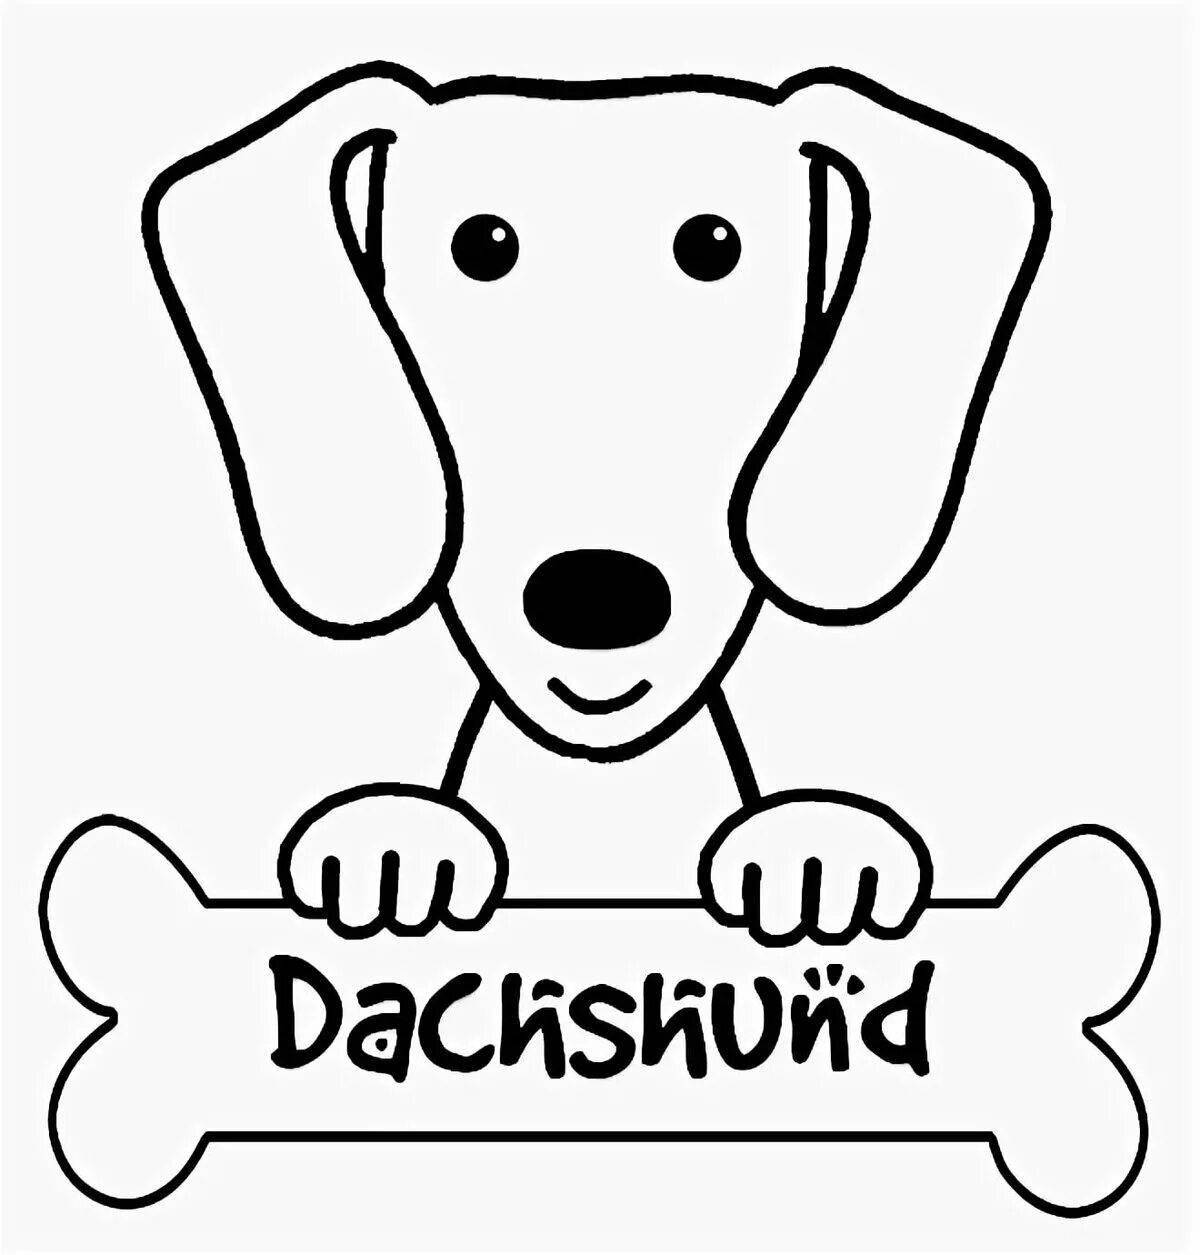 Live dachshund coloring book